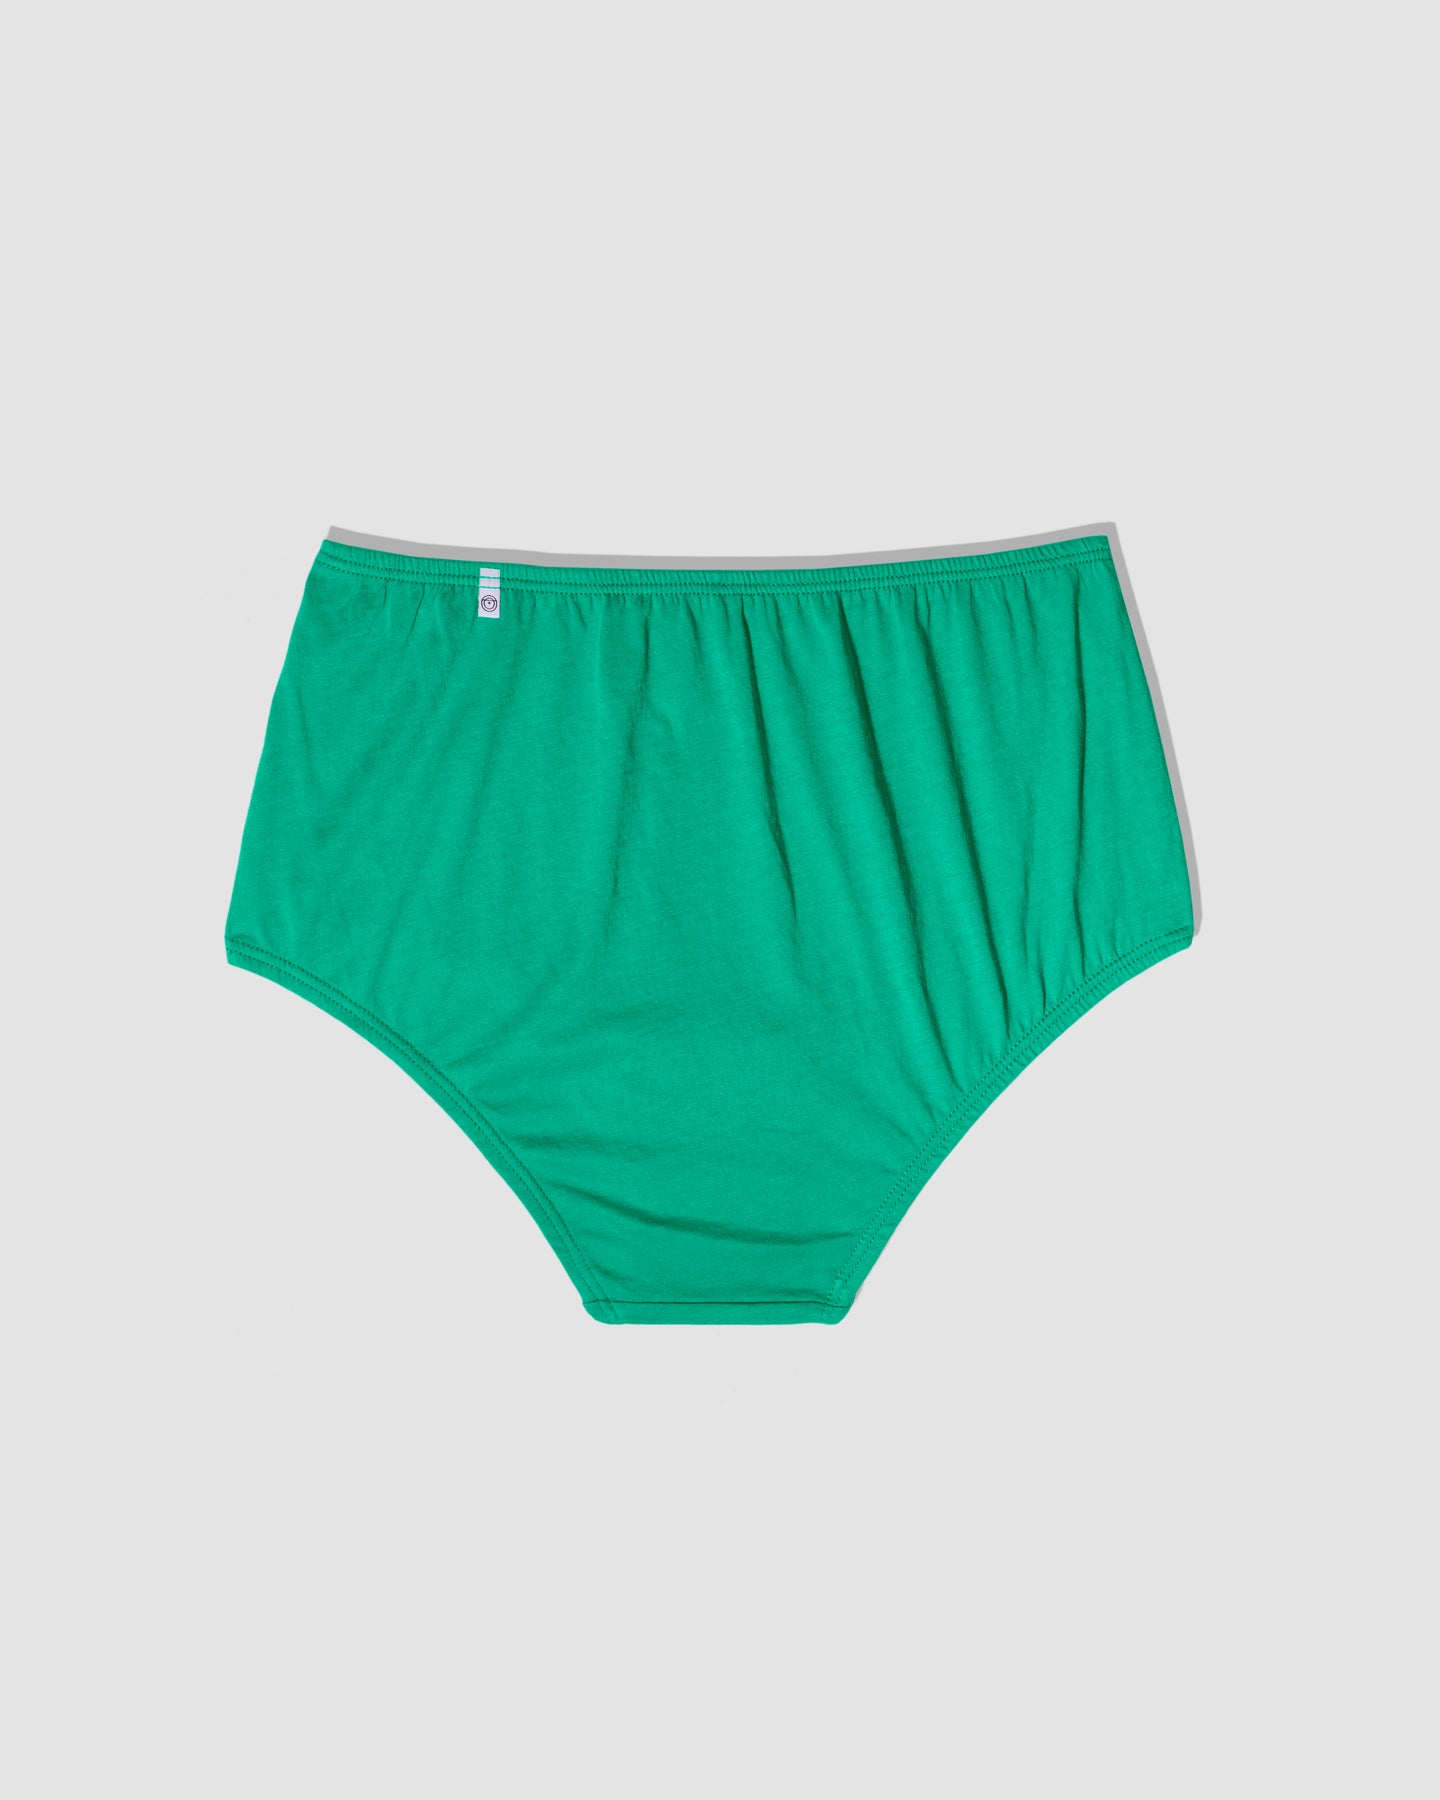 Green High Waisted Undies for Every Day Comfortable Seamless Basic